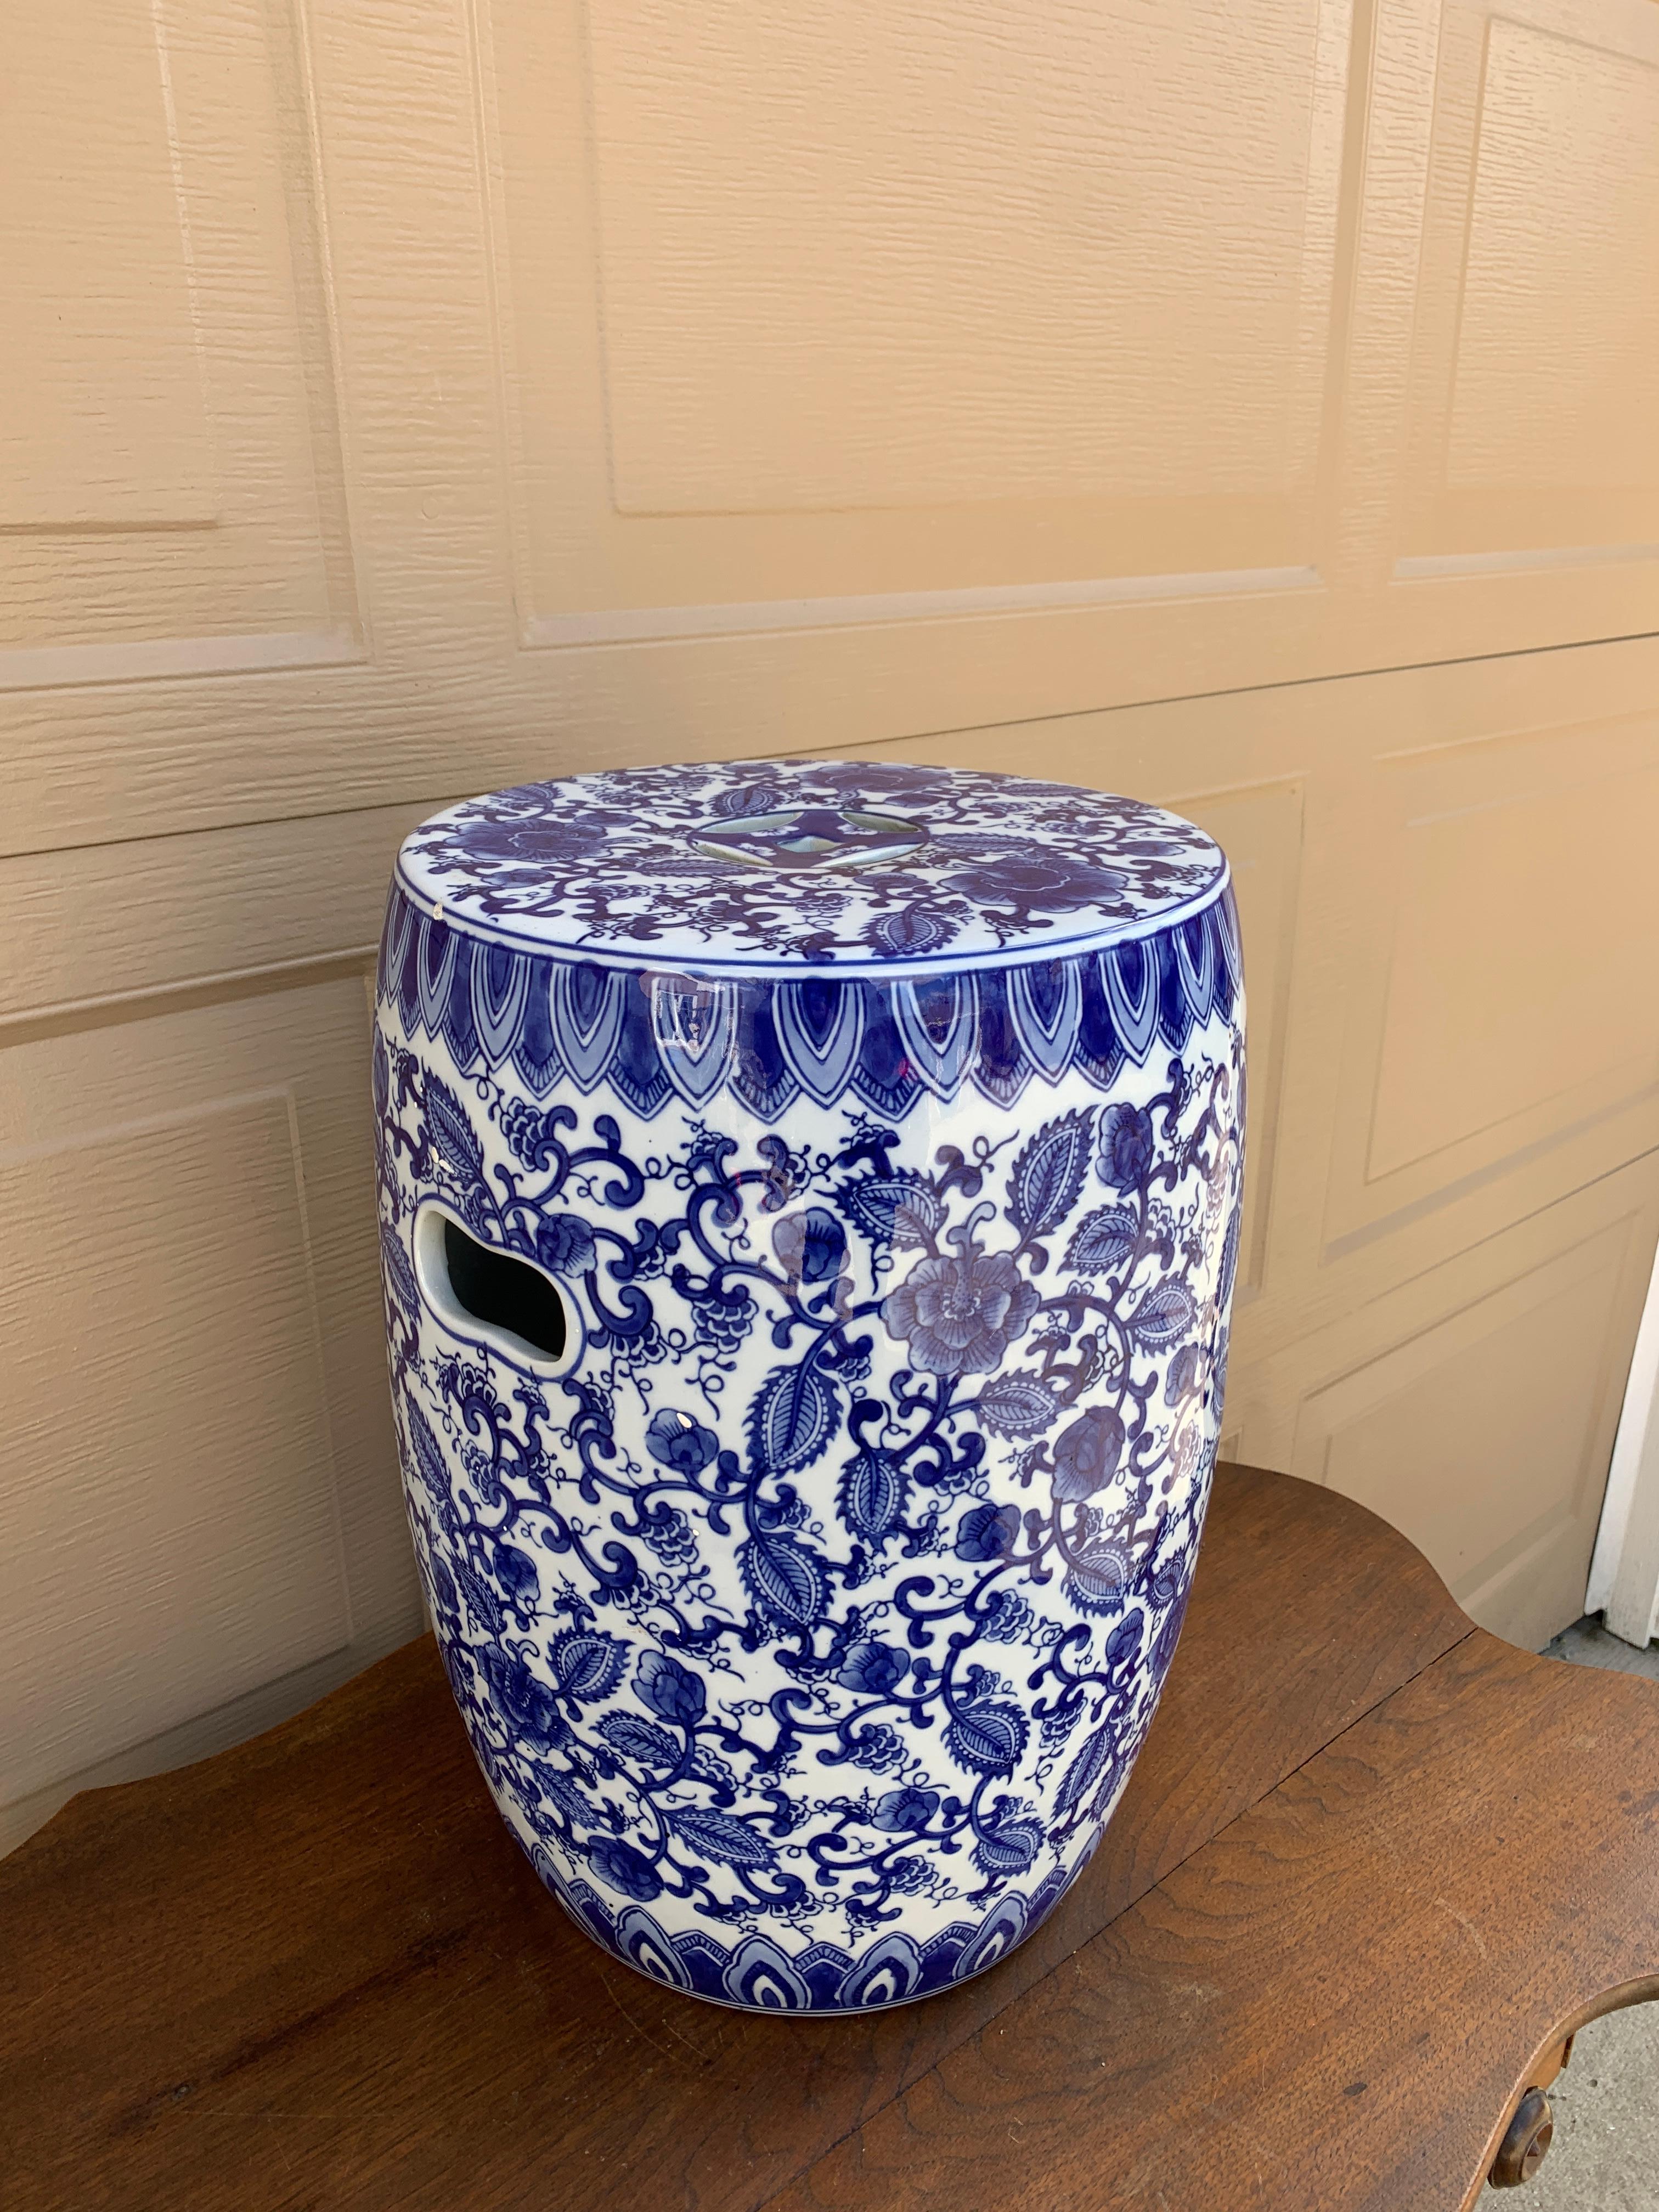 Chinoiserie Blue and White Porcelain Garden Stool In Good Condition For Sale In Elkhart, IN